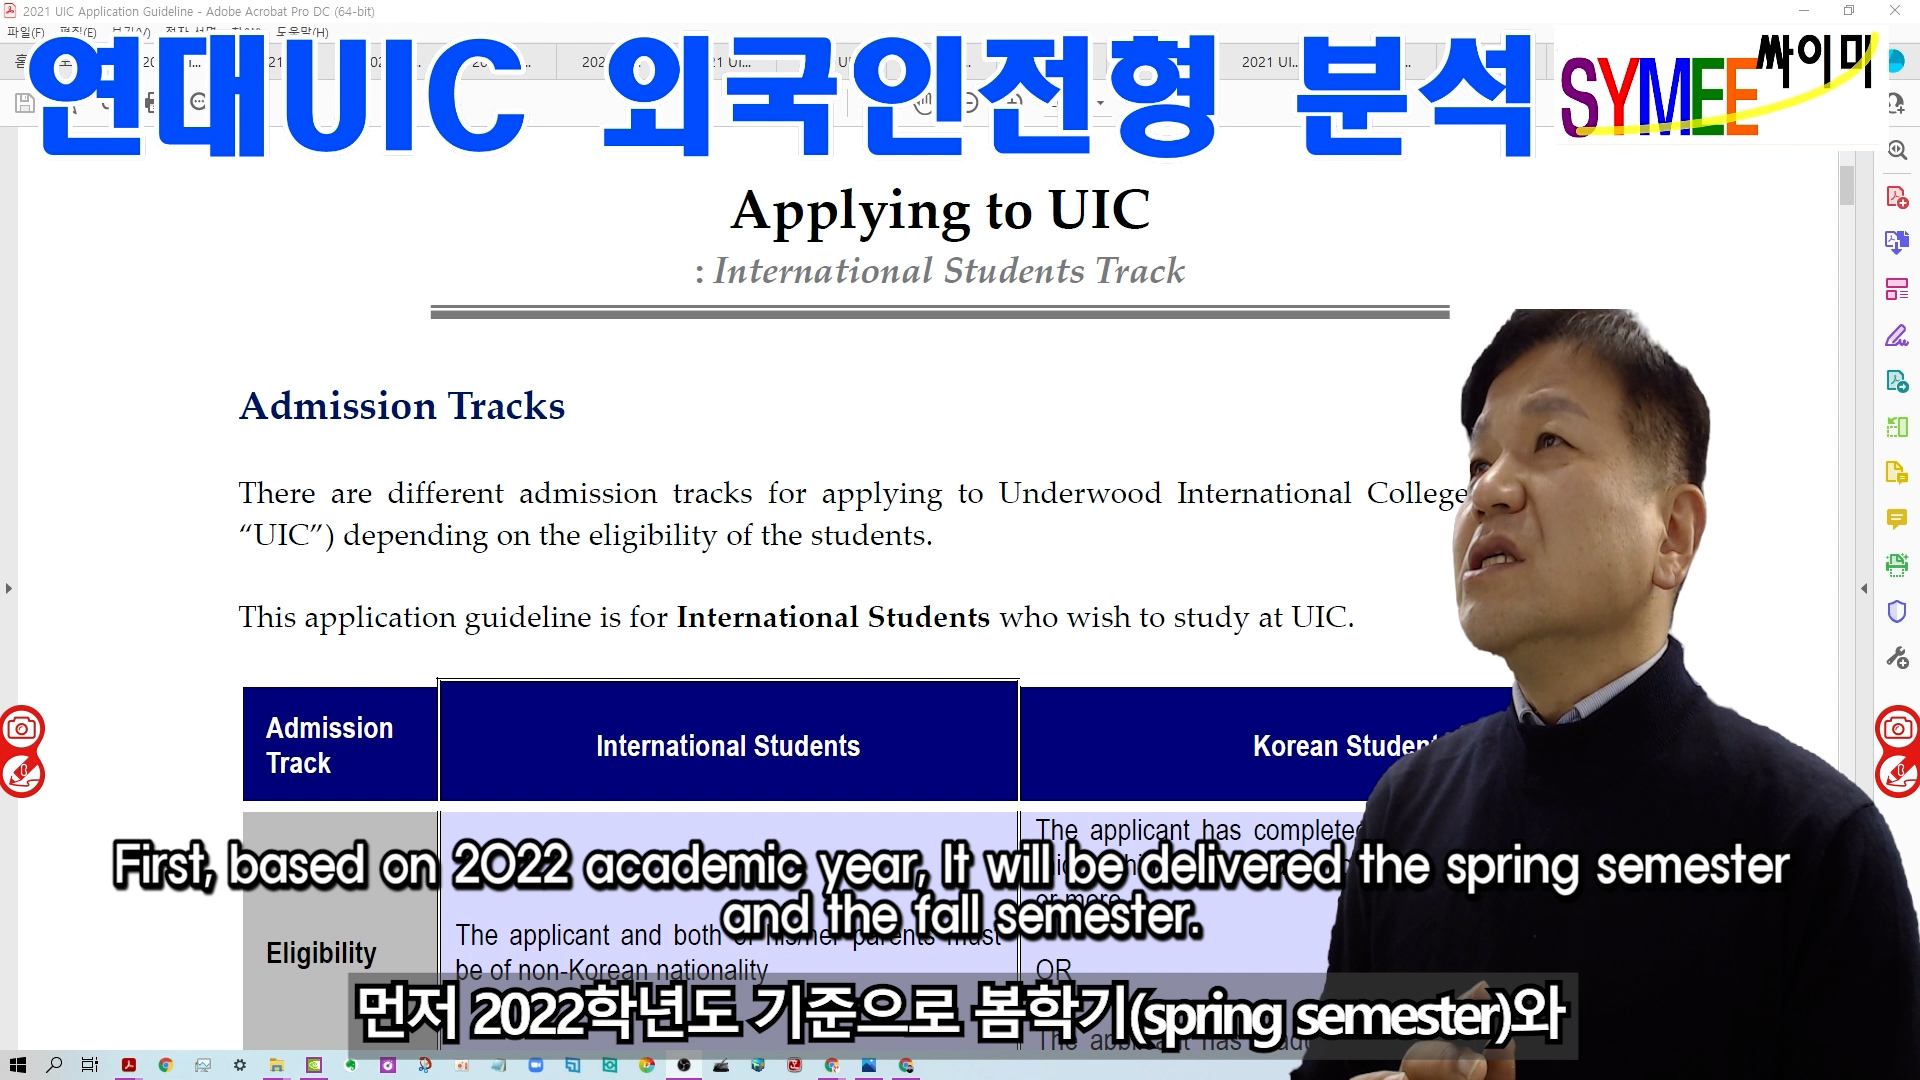 Yonsei Univ. Admission for UIC for Foreign Student 02 Qualifications.00_00_10_51.스틸 001.jpg